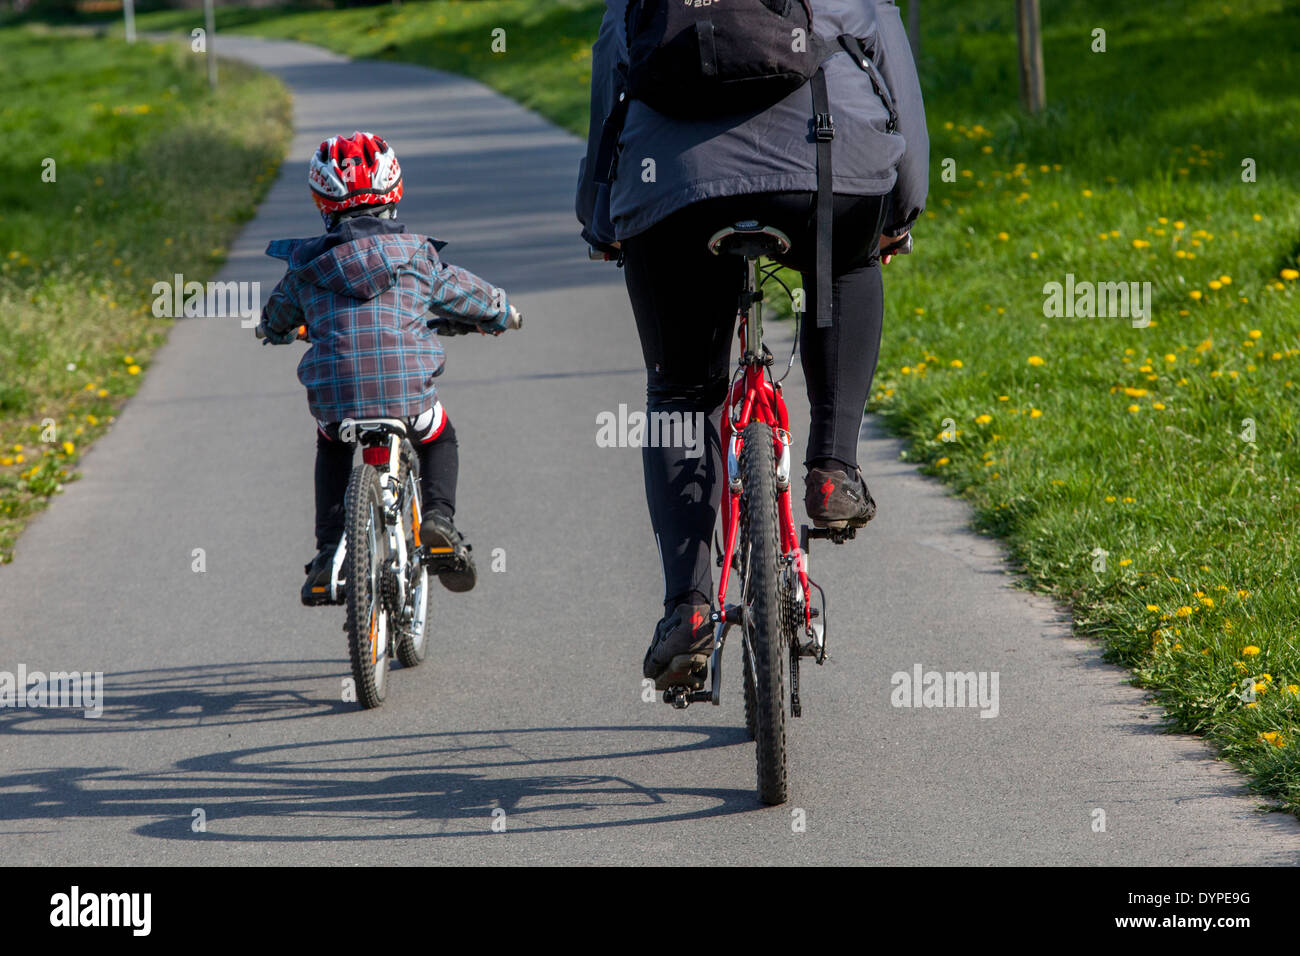 Bicycle path child on bicycle ride a bike rear view Child riding bike with helmet Stock Photo